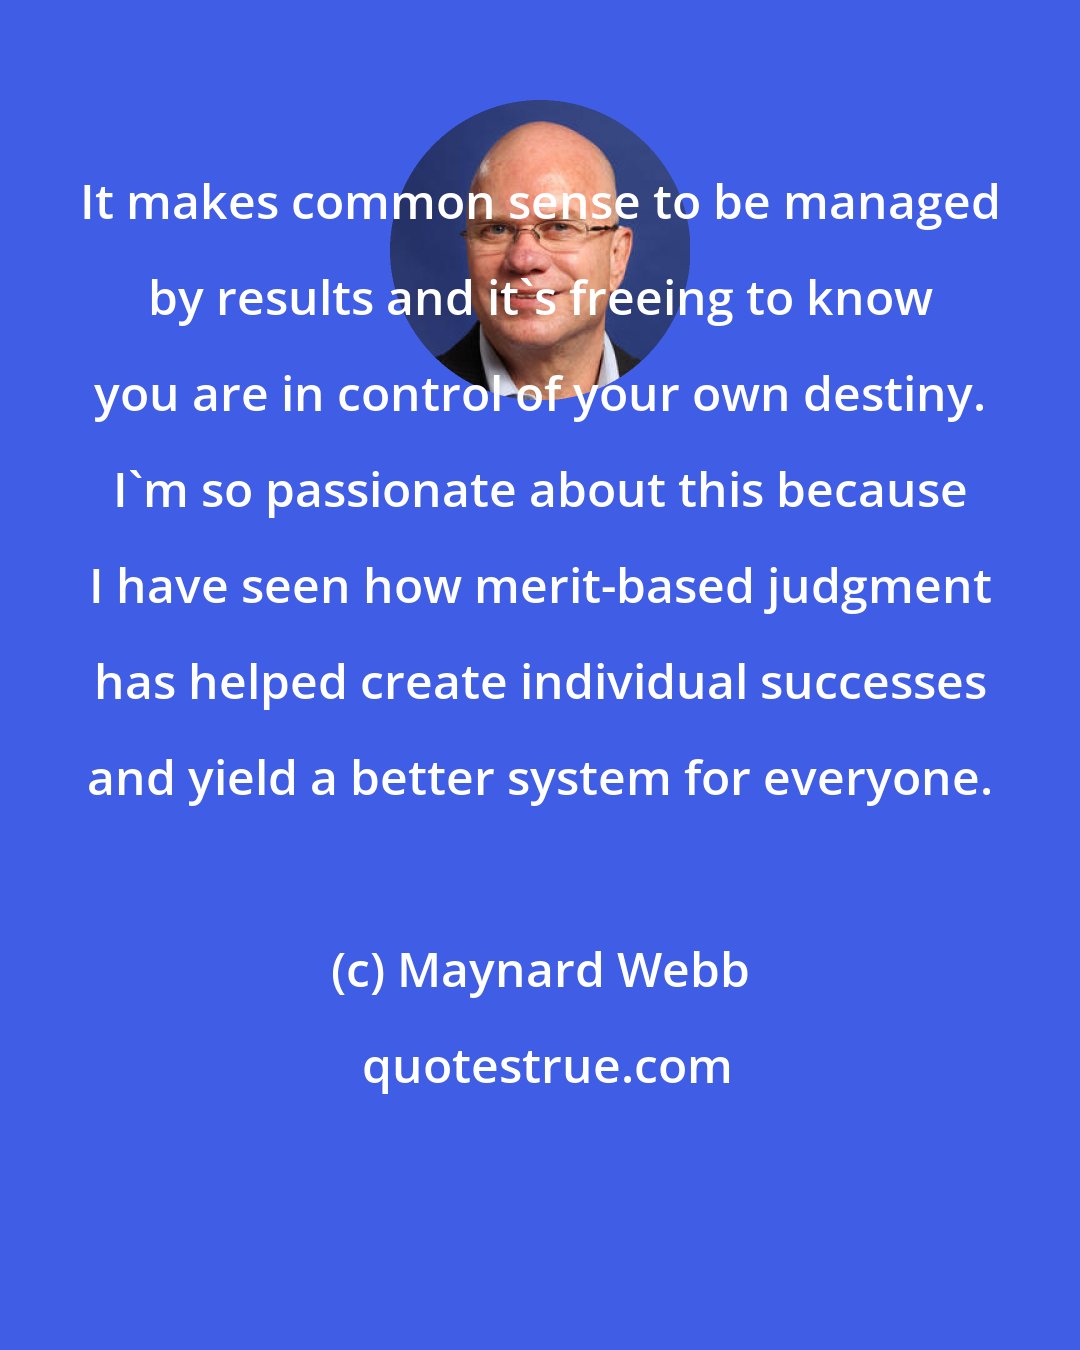 Maynard Webb: It makes common sense to be managed by results and it's freeing to know you are in control of your own destiny. I'm so passionate about this because I have seen how merit-based judgment has helped create individual successes and yield a better system for everyone.